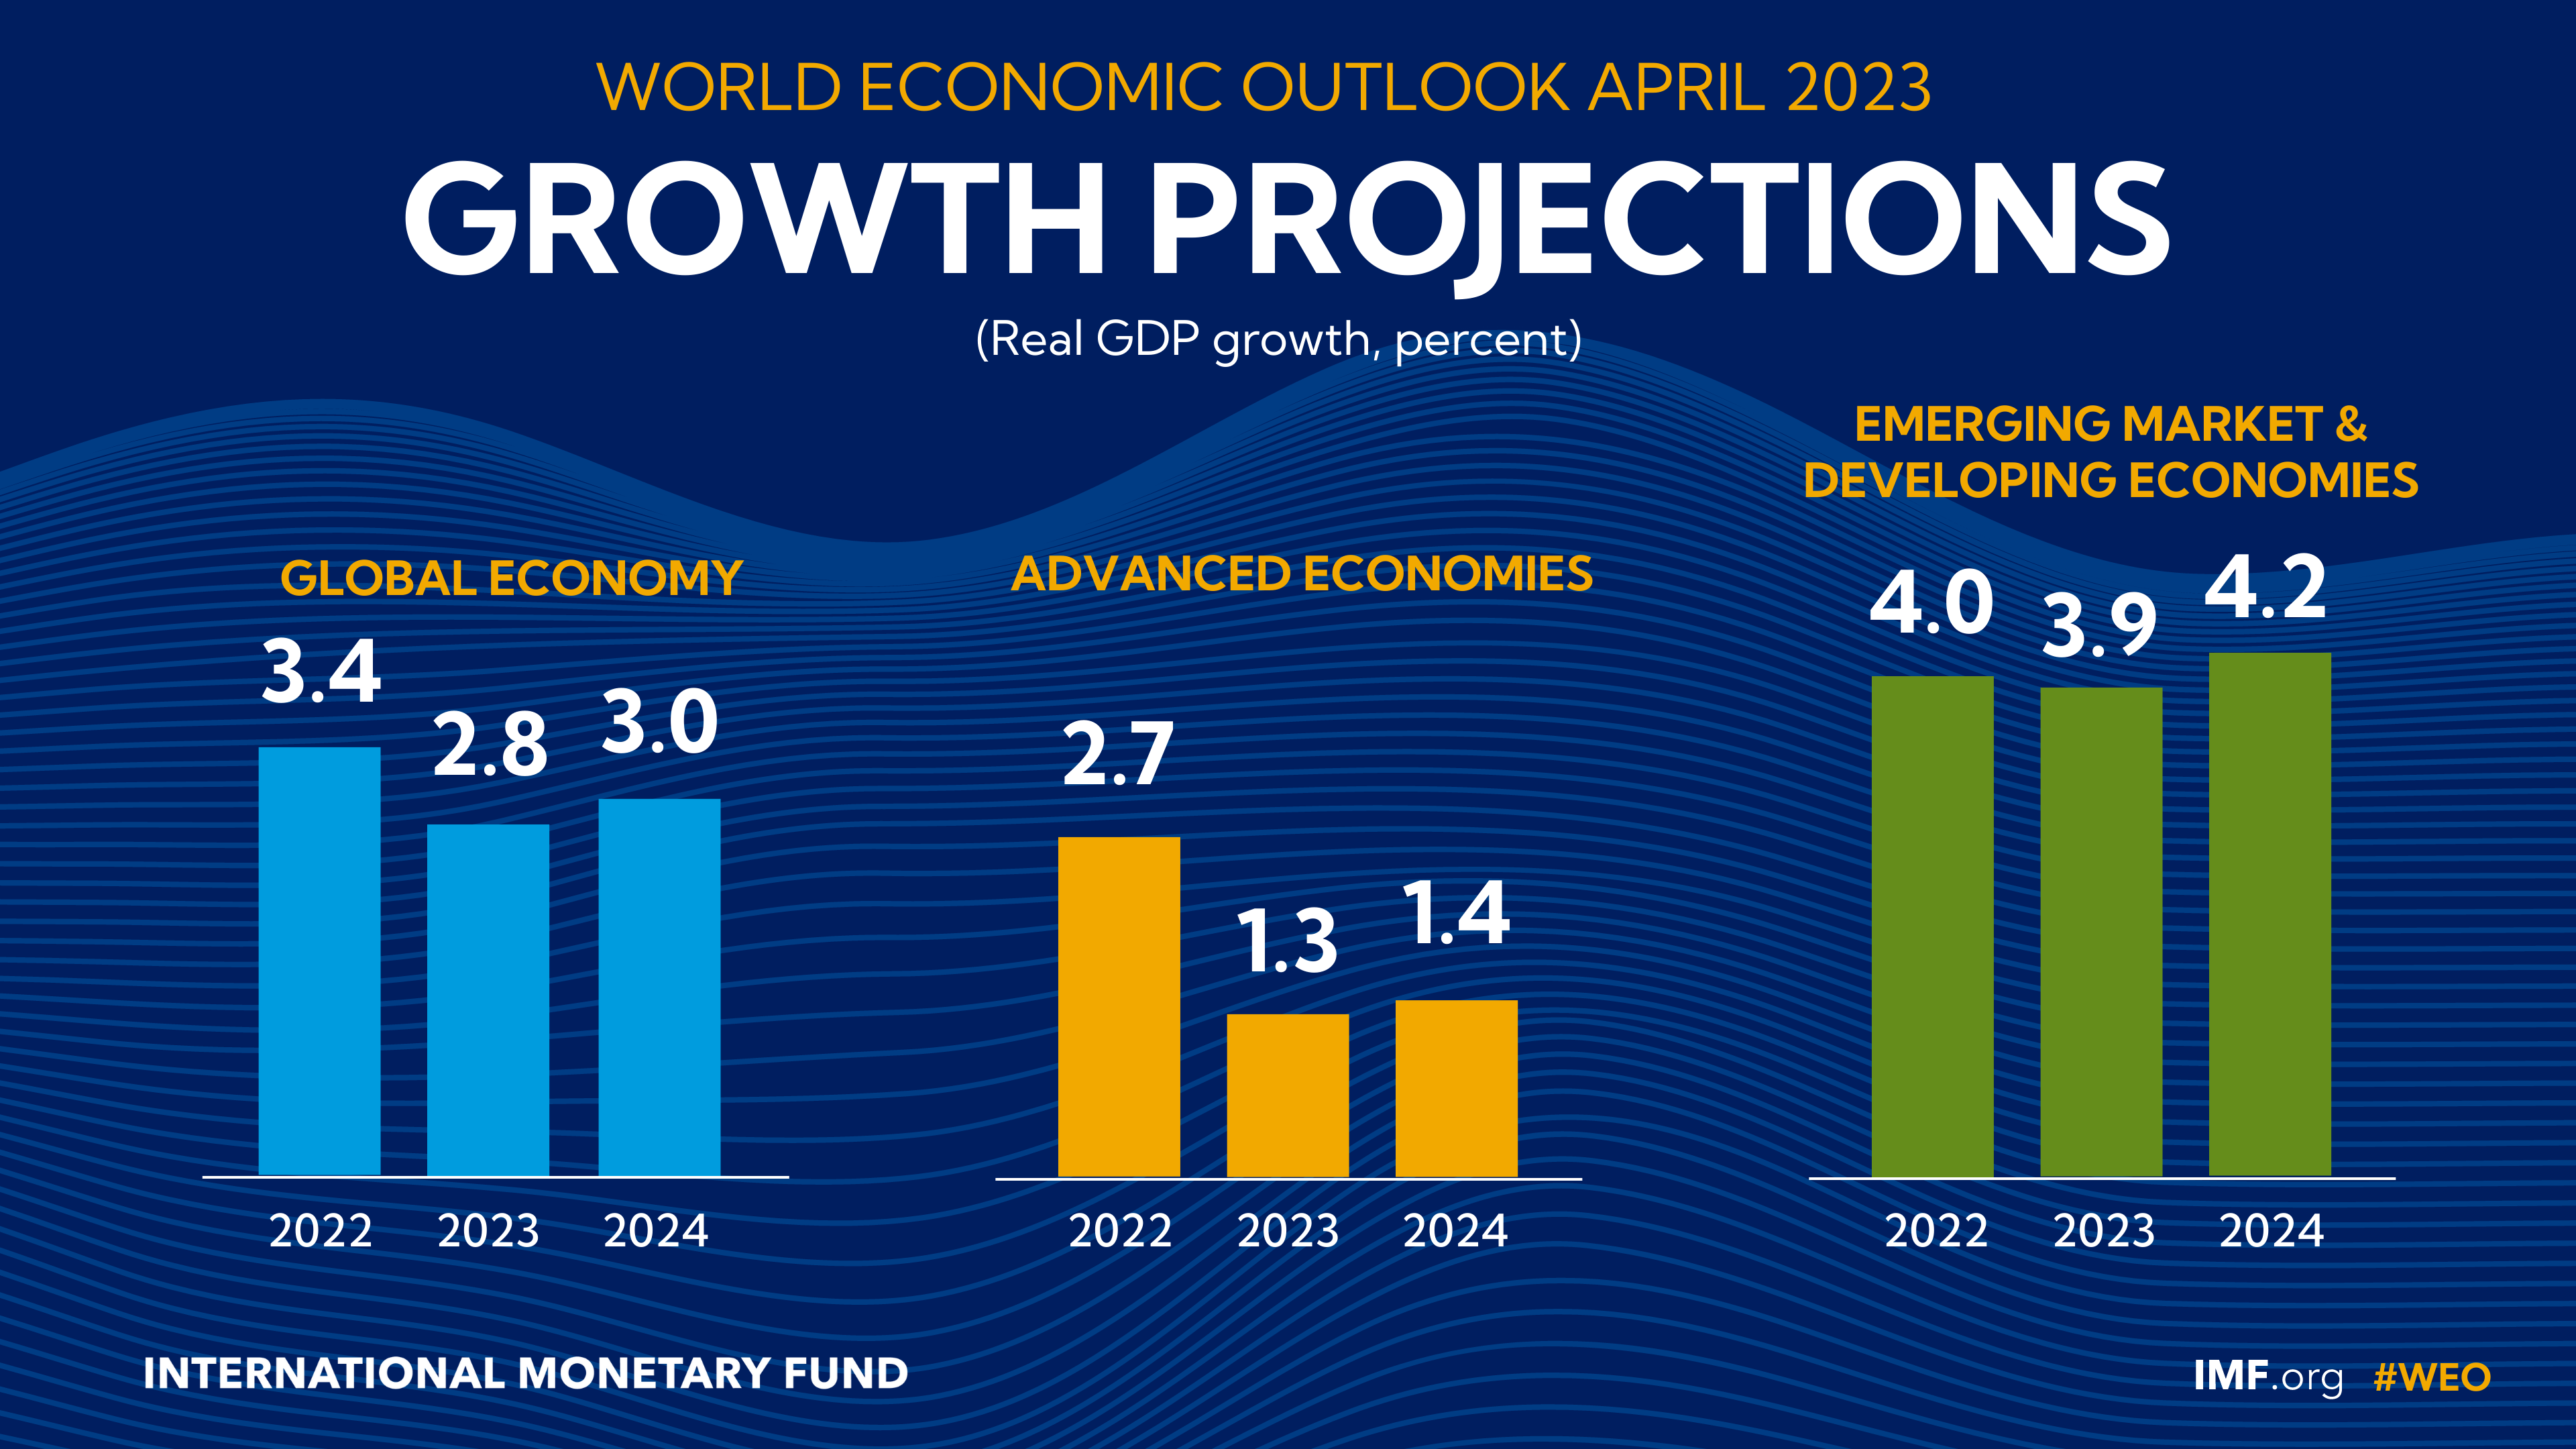 https://www.imf.org/-/media/Images/IMF/Publications/WEO/2023/April/English/growth-projections.ashx